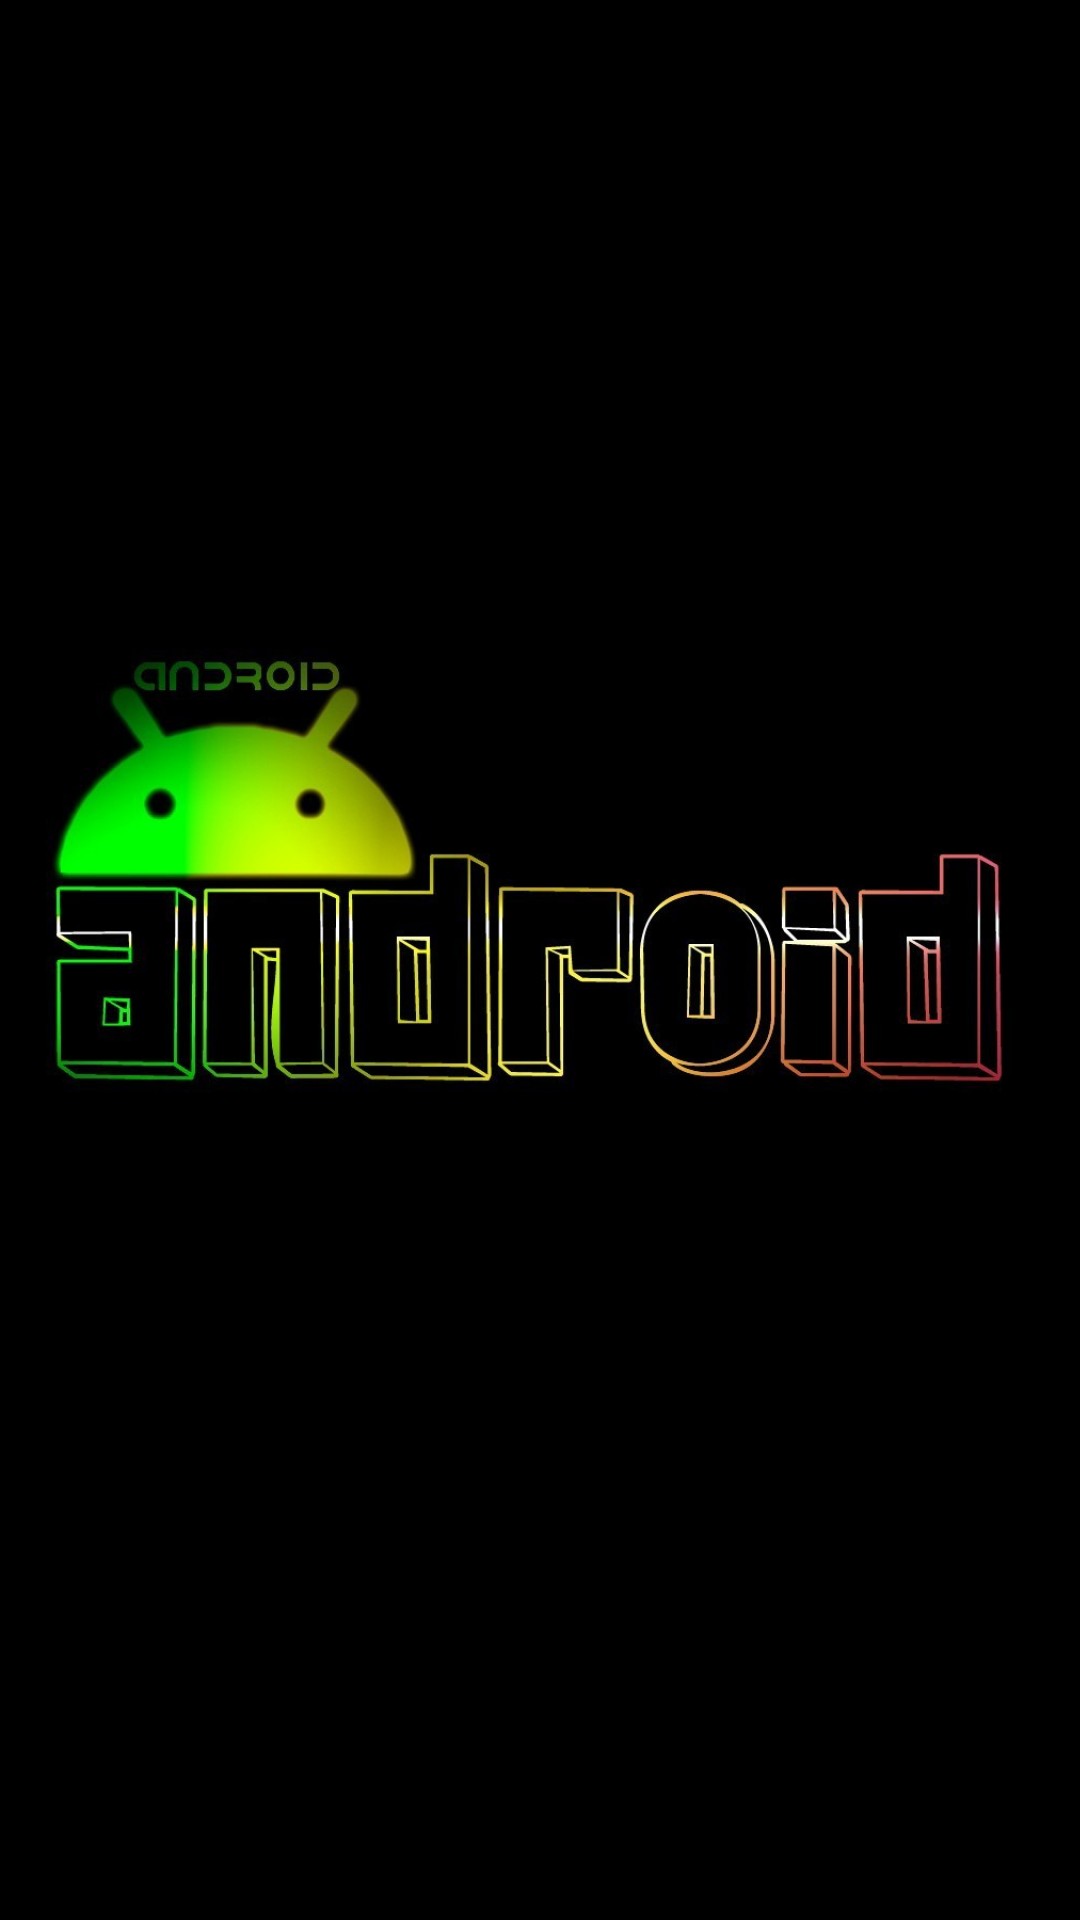 Android Logo Wallpapers - Wallpaper Cave